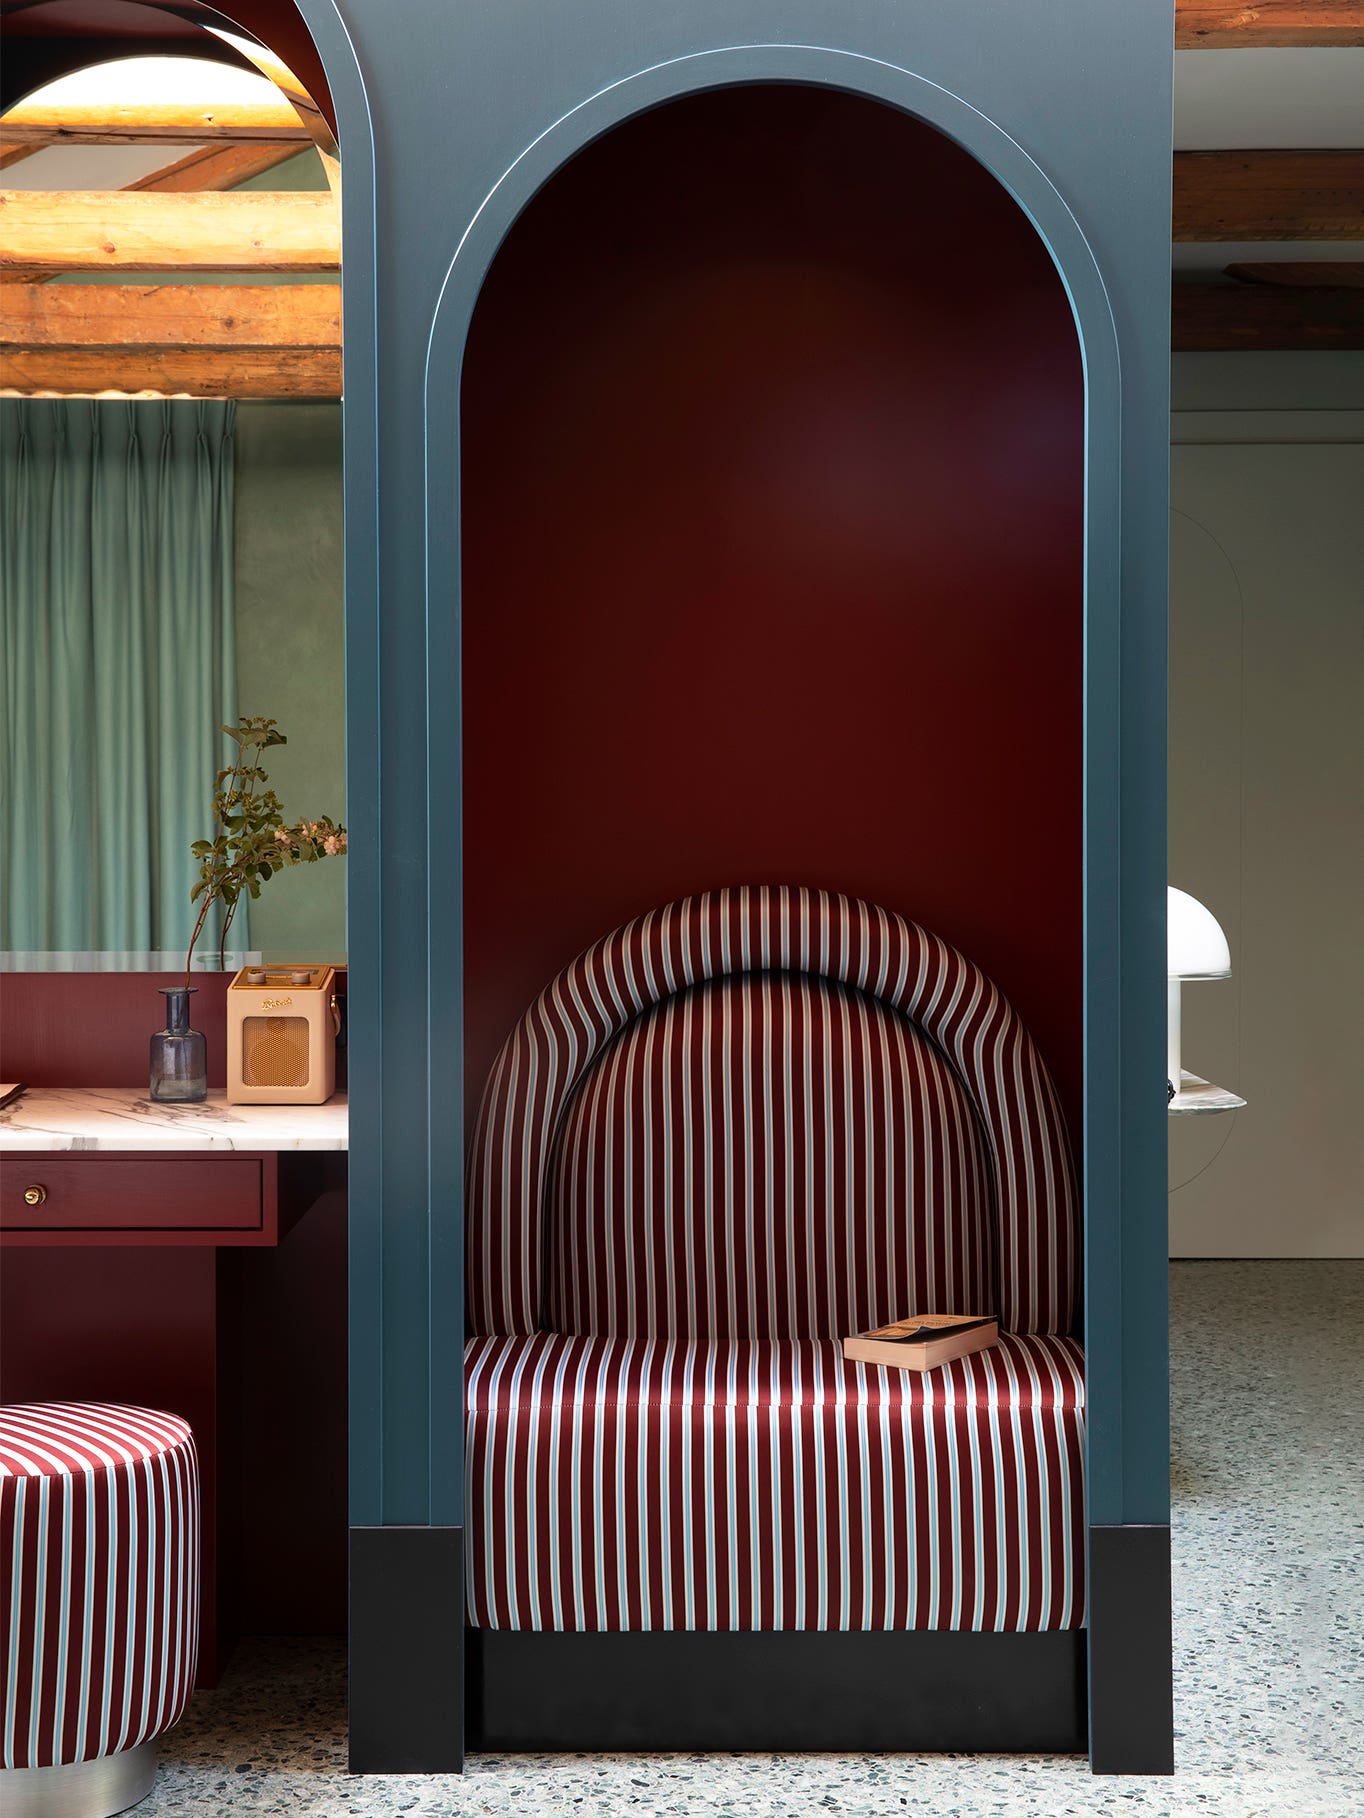 This Splashy Venice Hotel Was Inspired by the City’s Canals